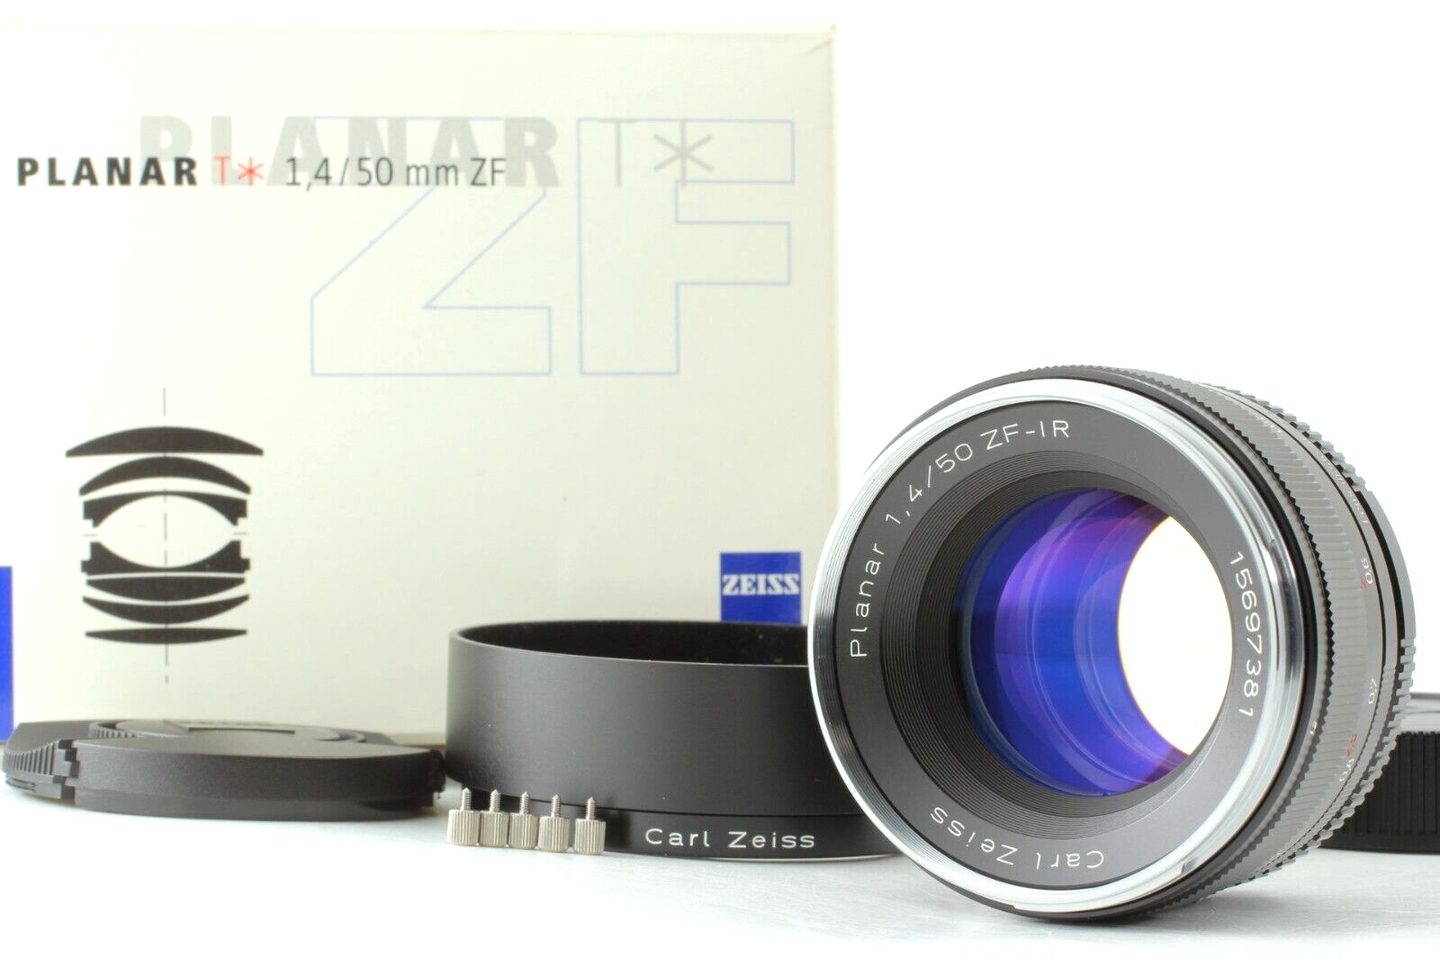 The Zeiss ZF-IR lens along with its box